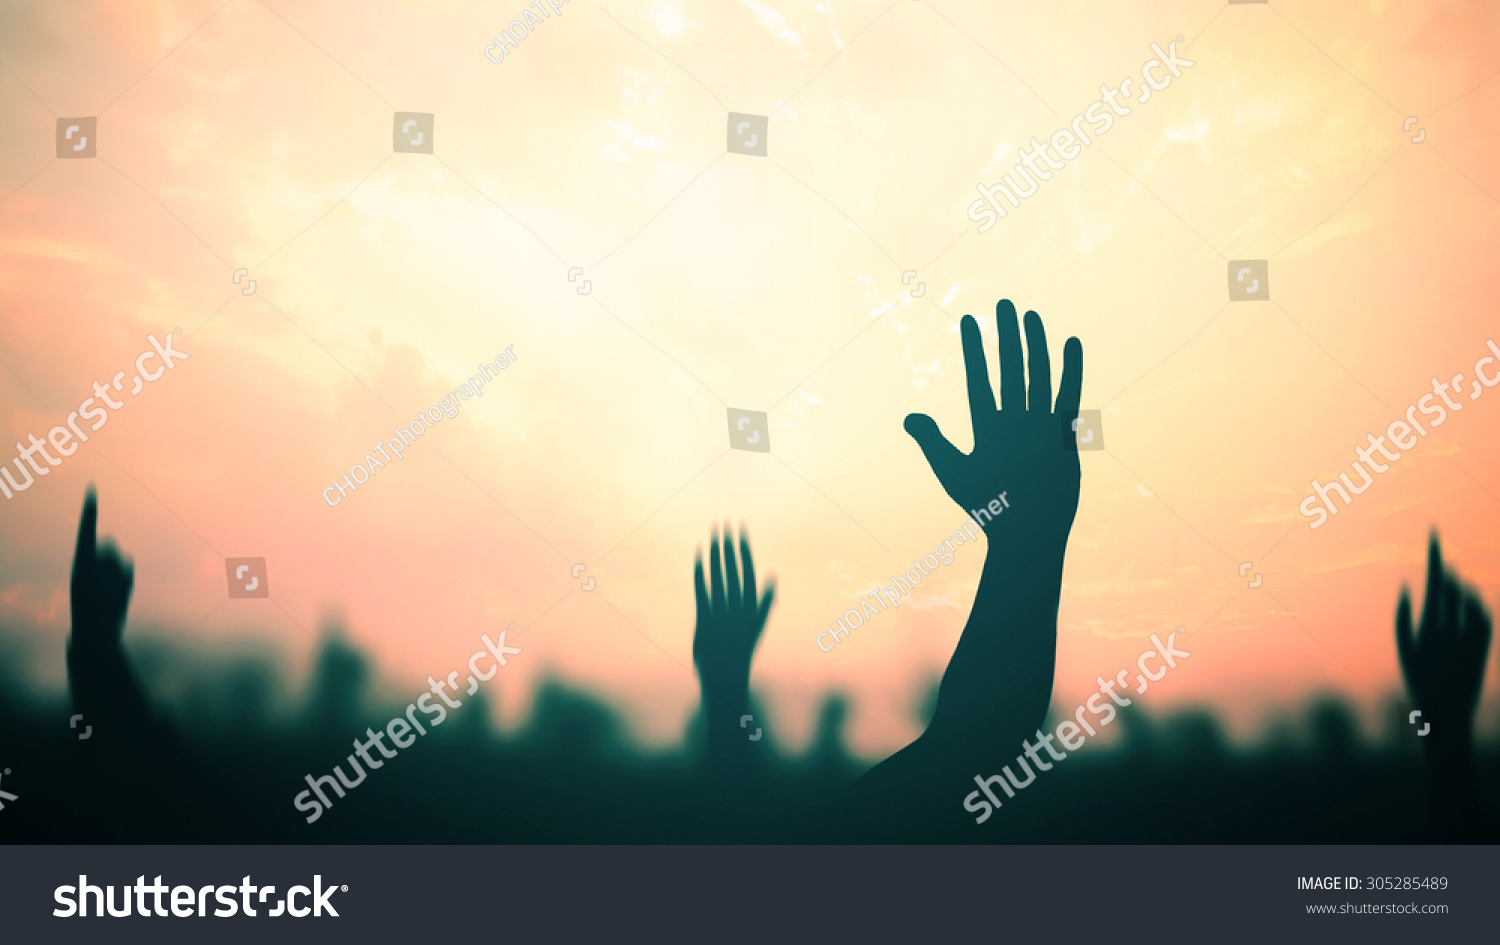 International migrants day concept: Silhouette many people raised hands over autumn sunset background #305285489